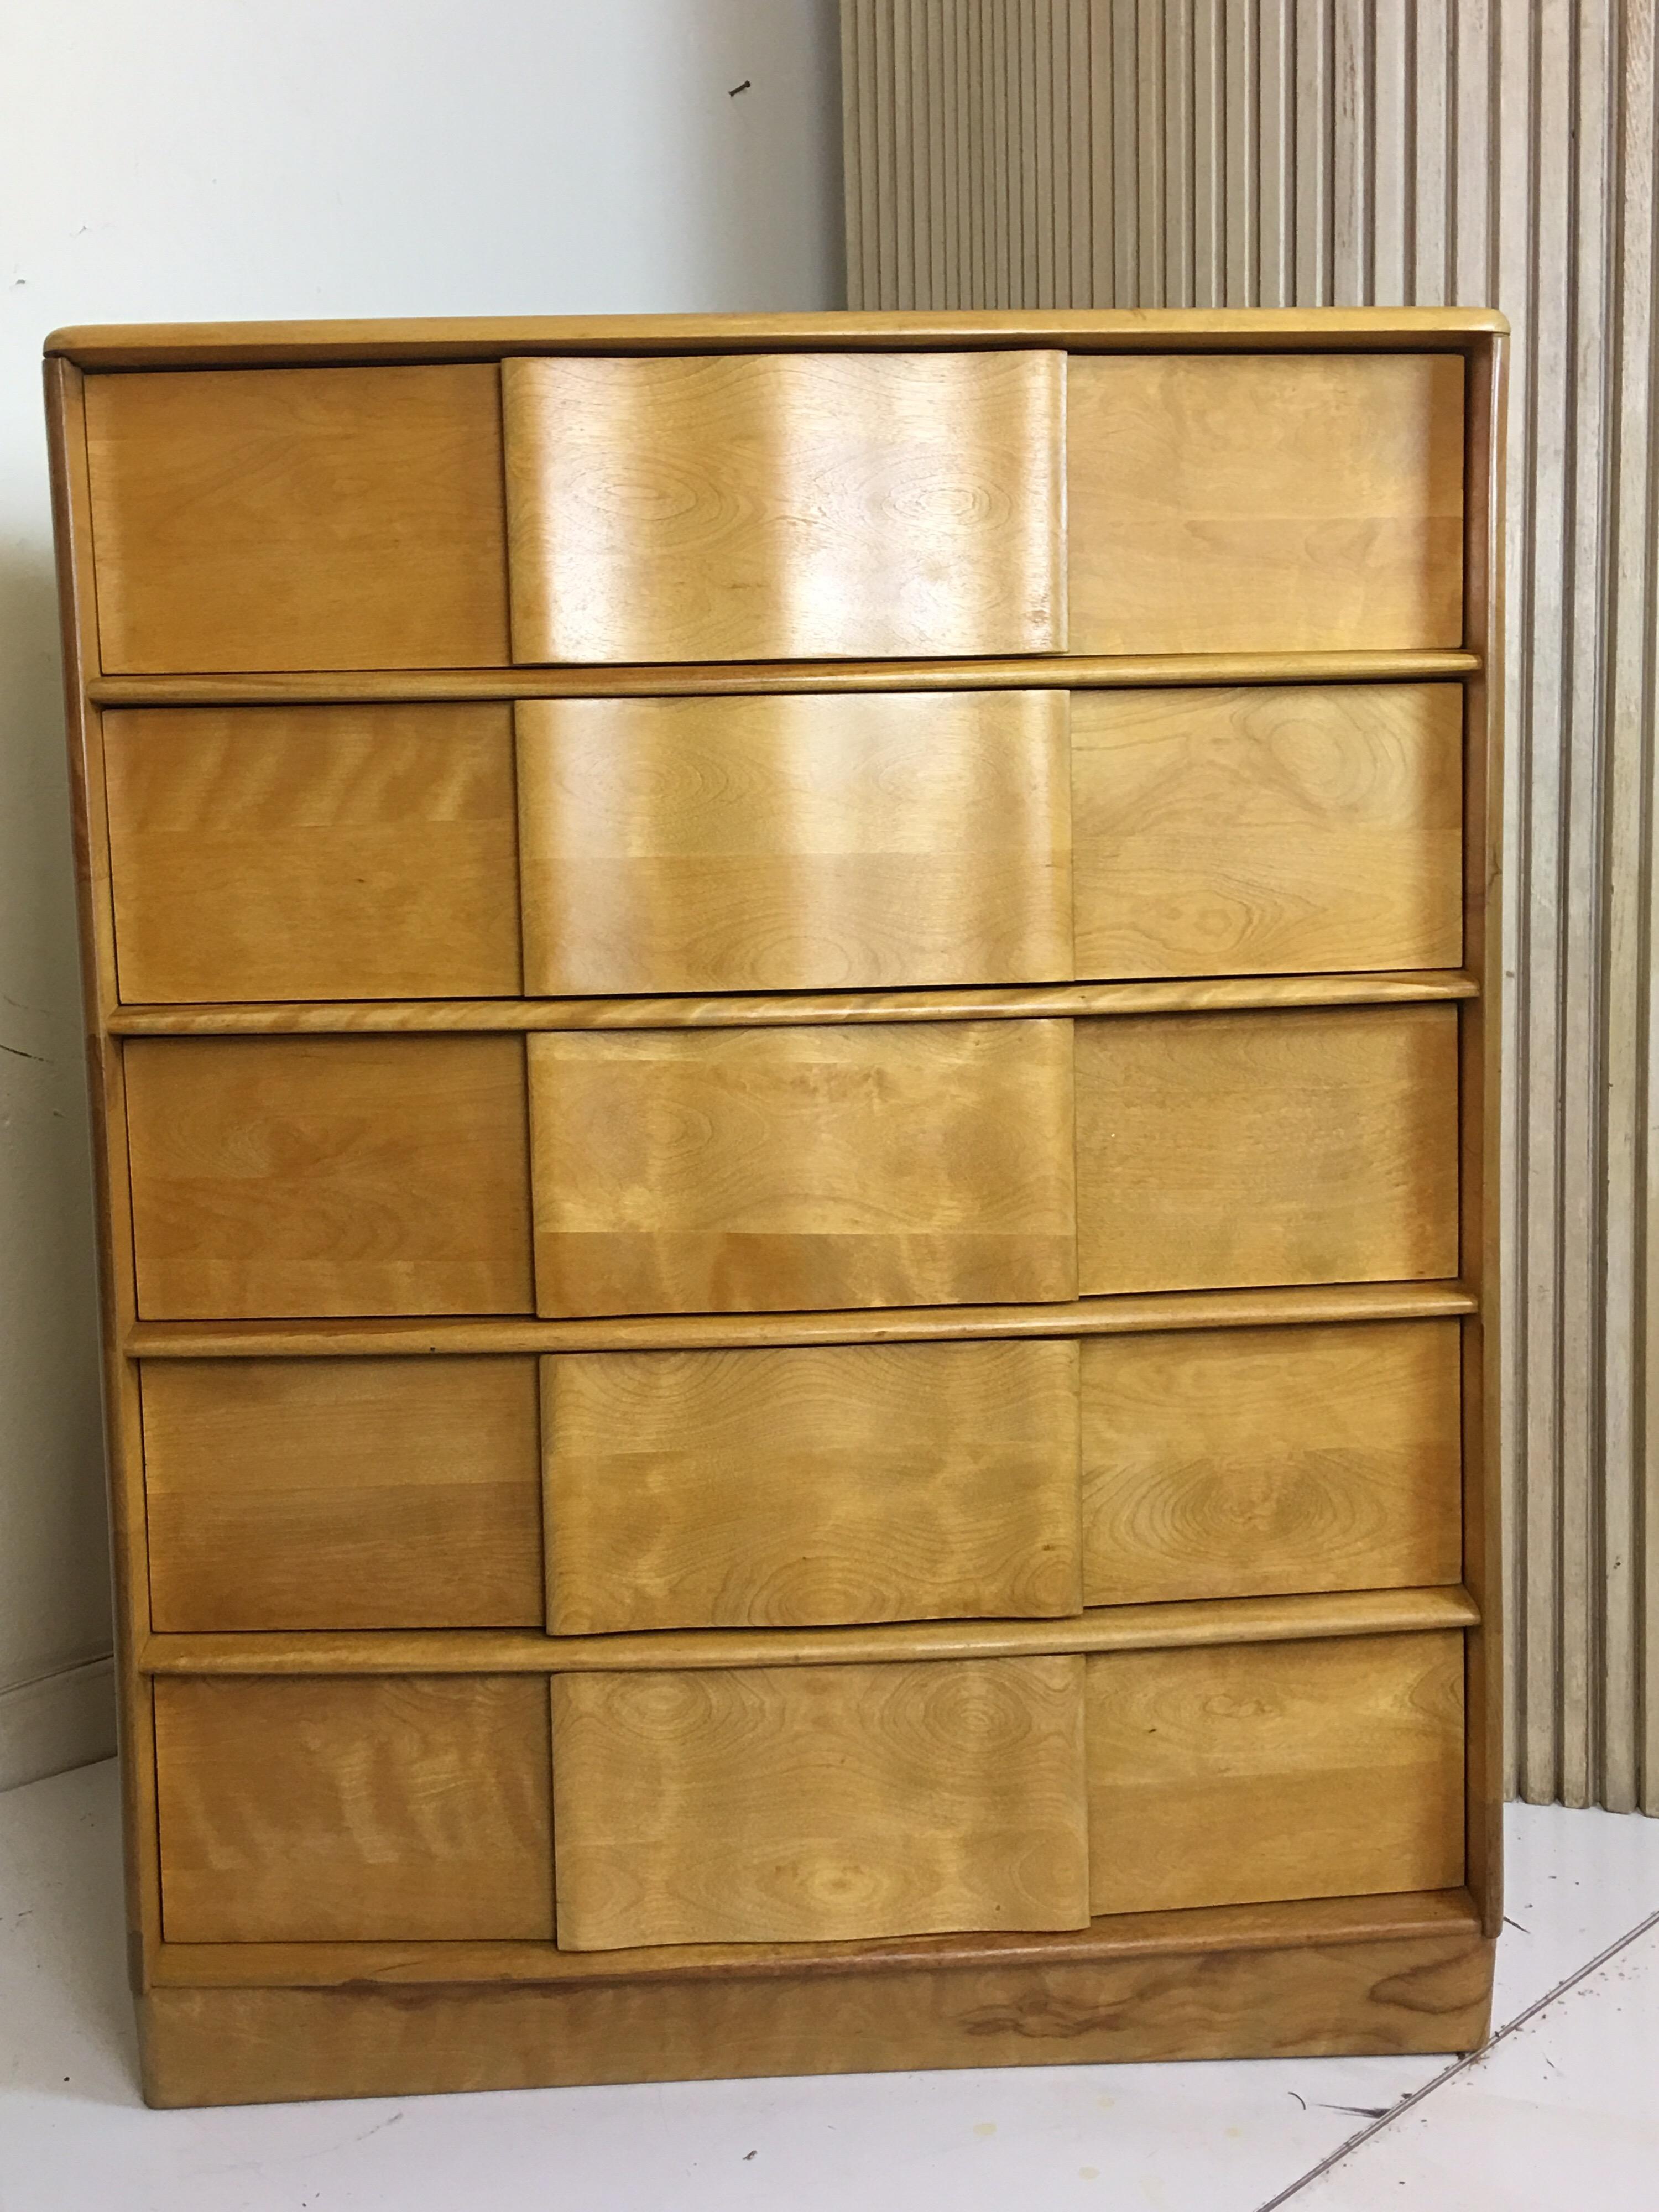 Heywood Wakefield 5-drawer sculptura dresser. Newly refinished and ready to go! Solid wood construction and properly functioning drawers is a major highlight of this line of furniture.